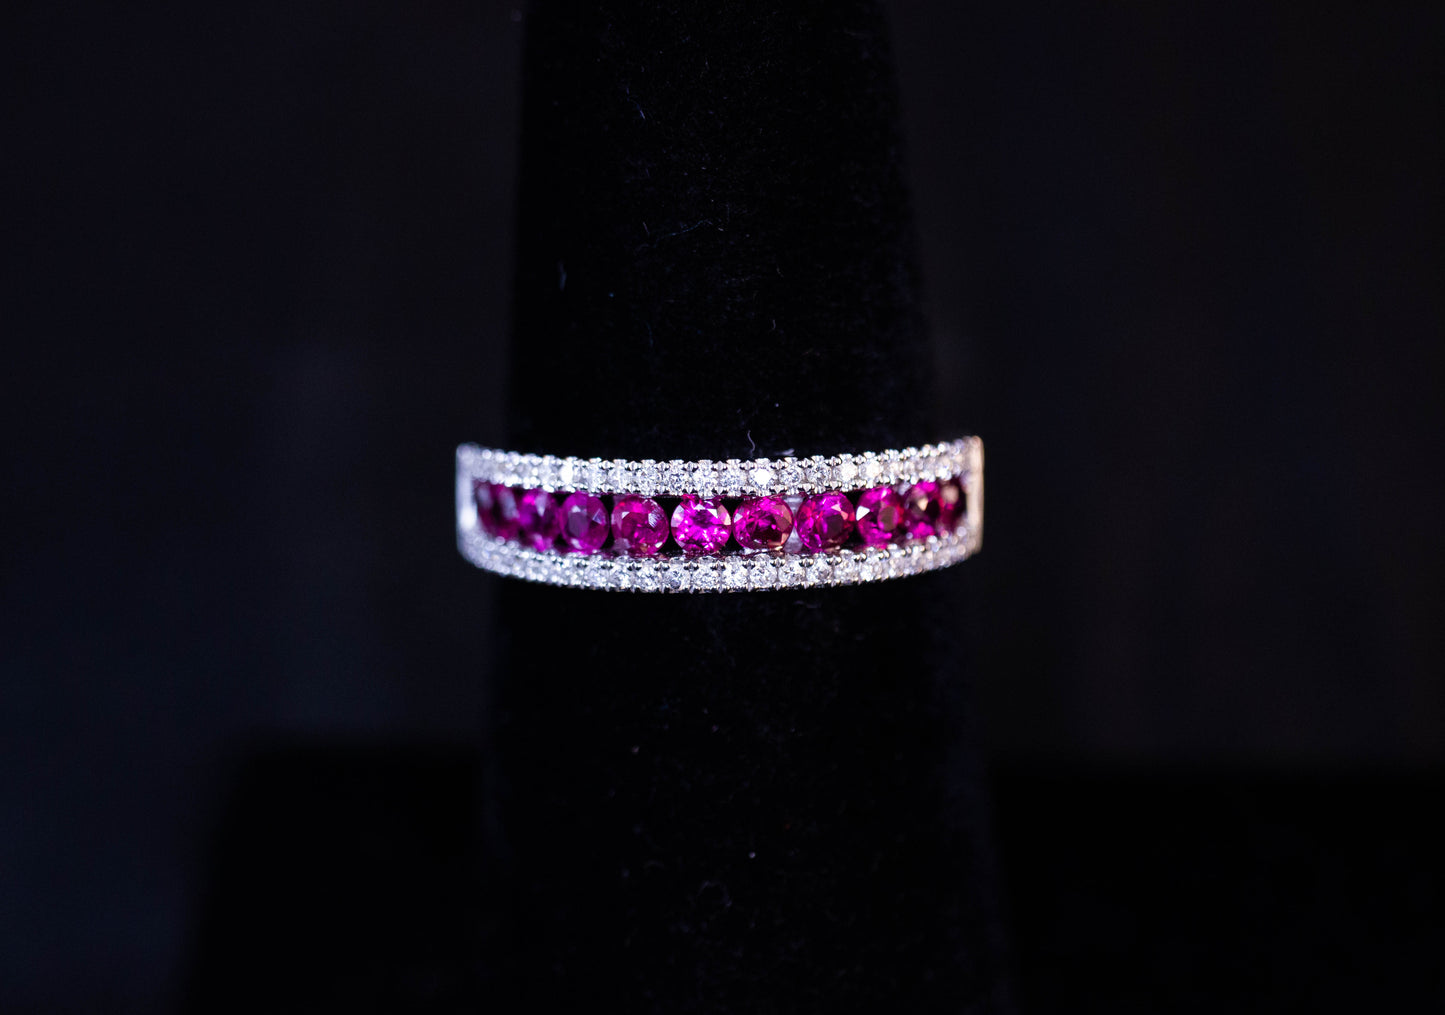 Diamond and Ruby Eternity Ring